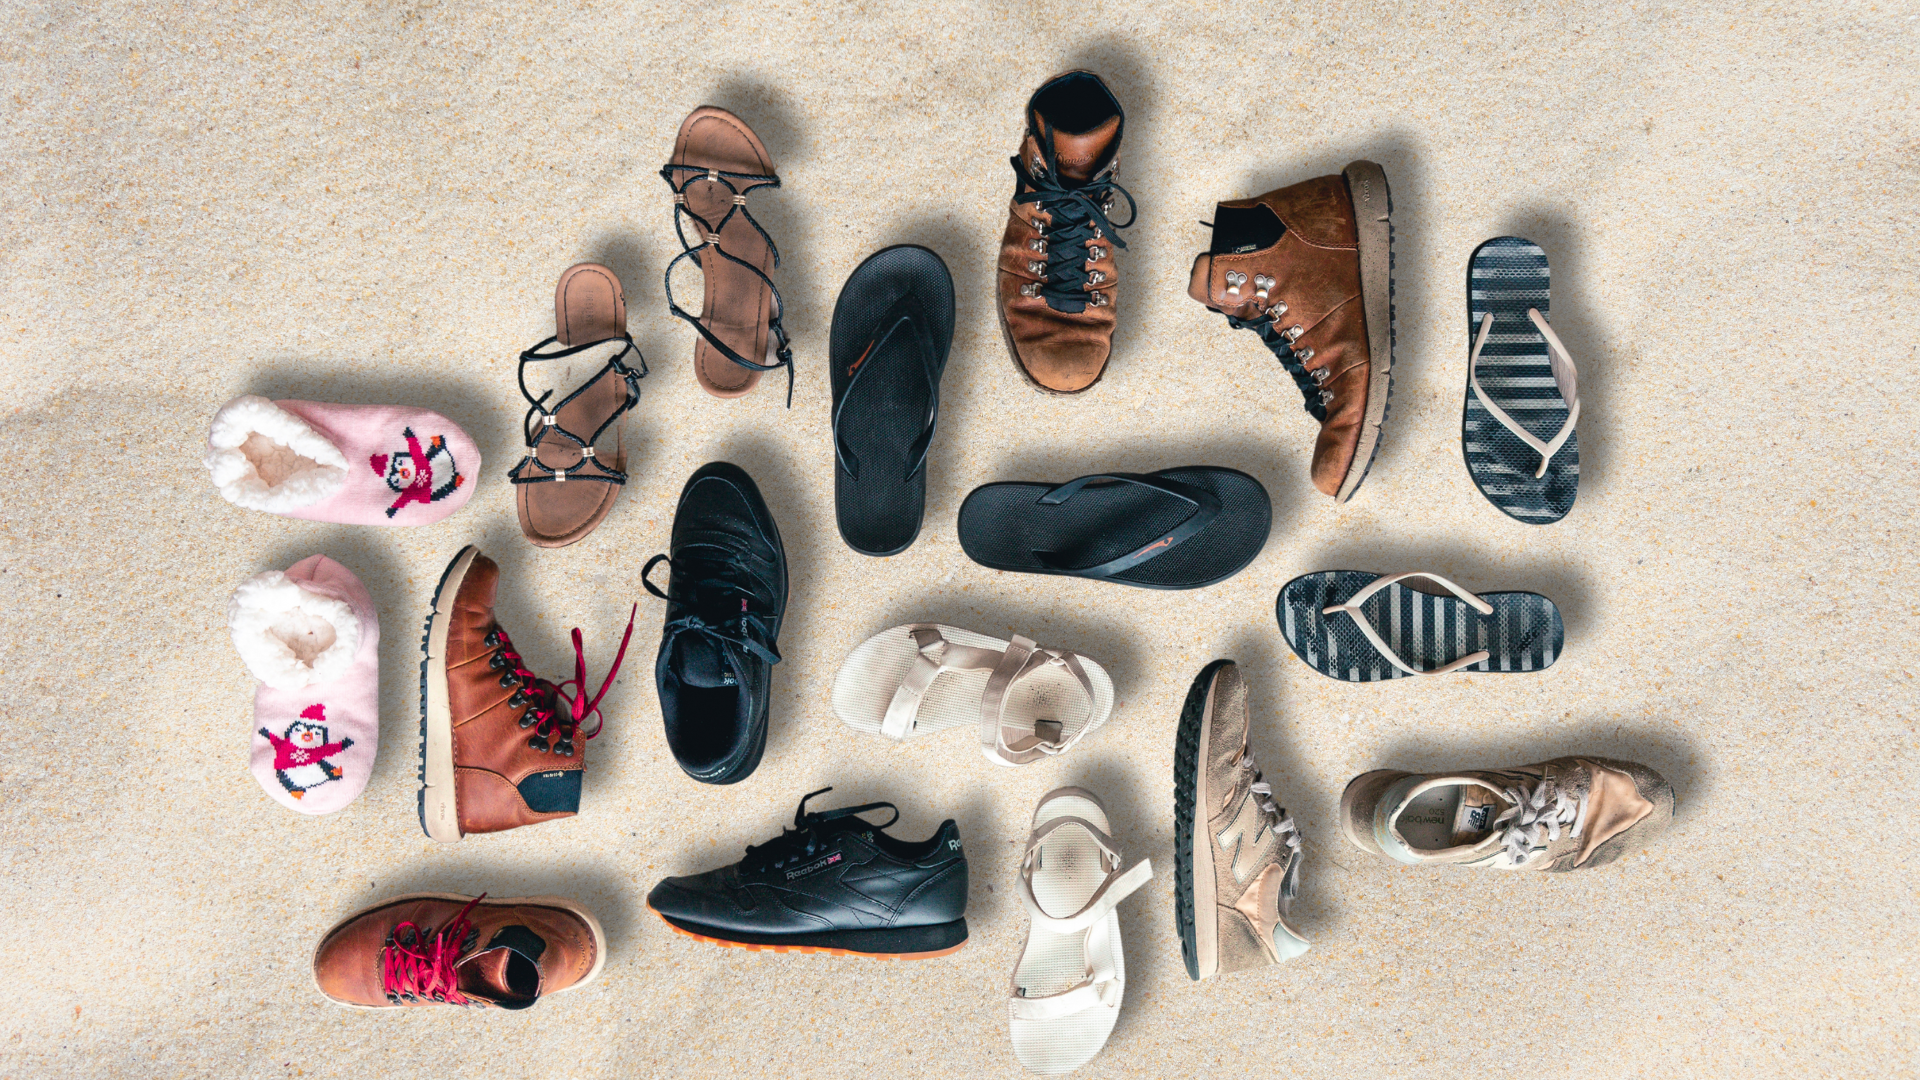 shoes and flip flops on the sand